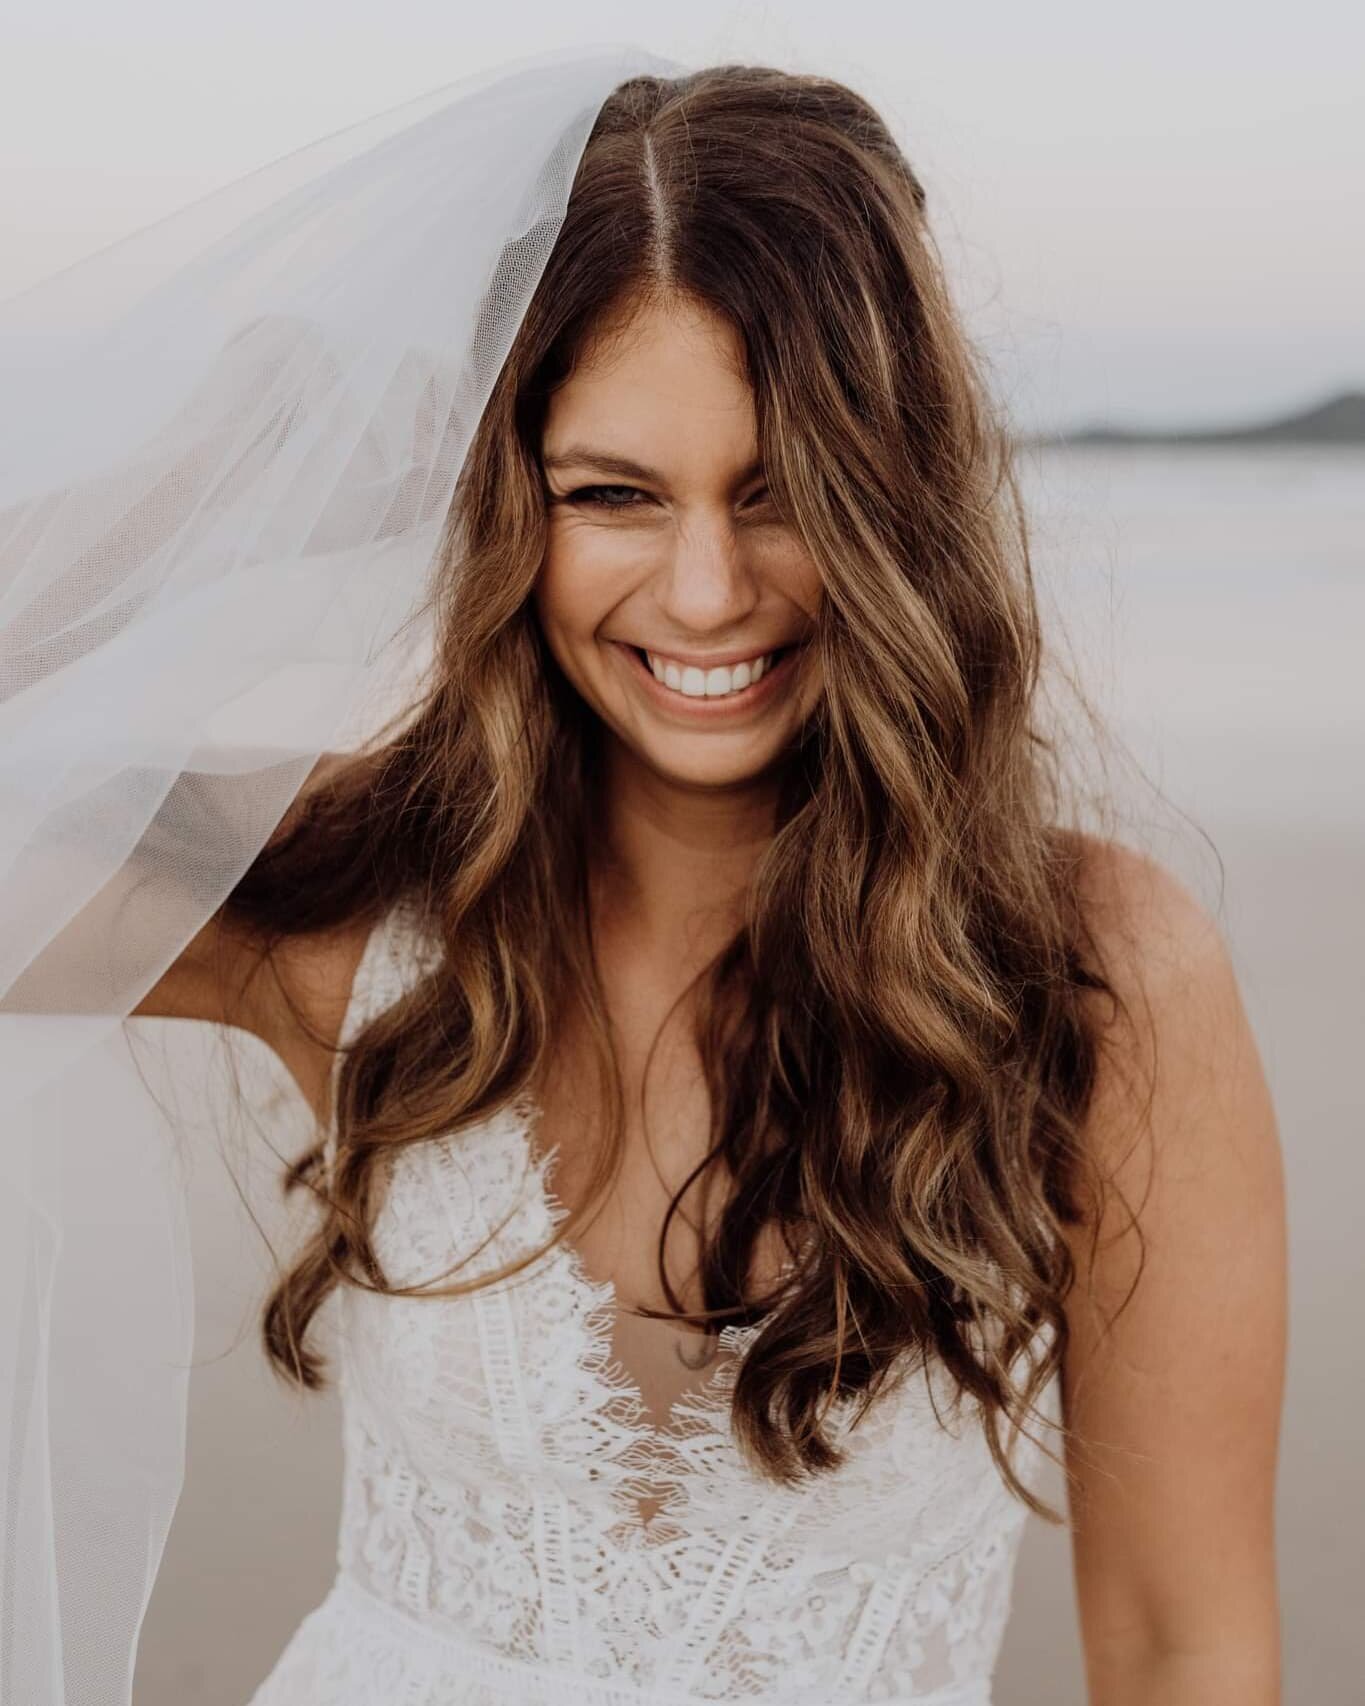 A smile is the beauty of the soul 😁👰&zwj;♀️
.
#qldhairdresser #qldhair #hairgoals
#sunshinecoasthairdresser #sunshinecoastweddings #sunshinecoastweddinghairdresser #sunshinecoastbuisness #weddings #weddinghair #weddinghairinspo #weddinghairstyles #